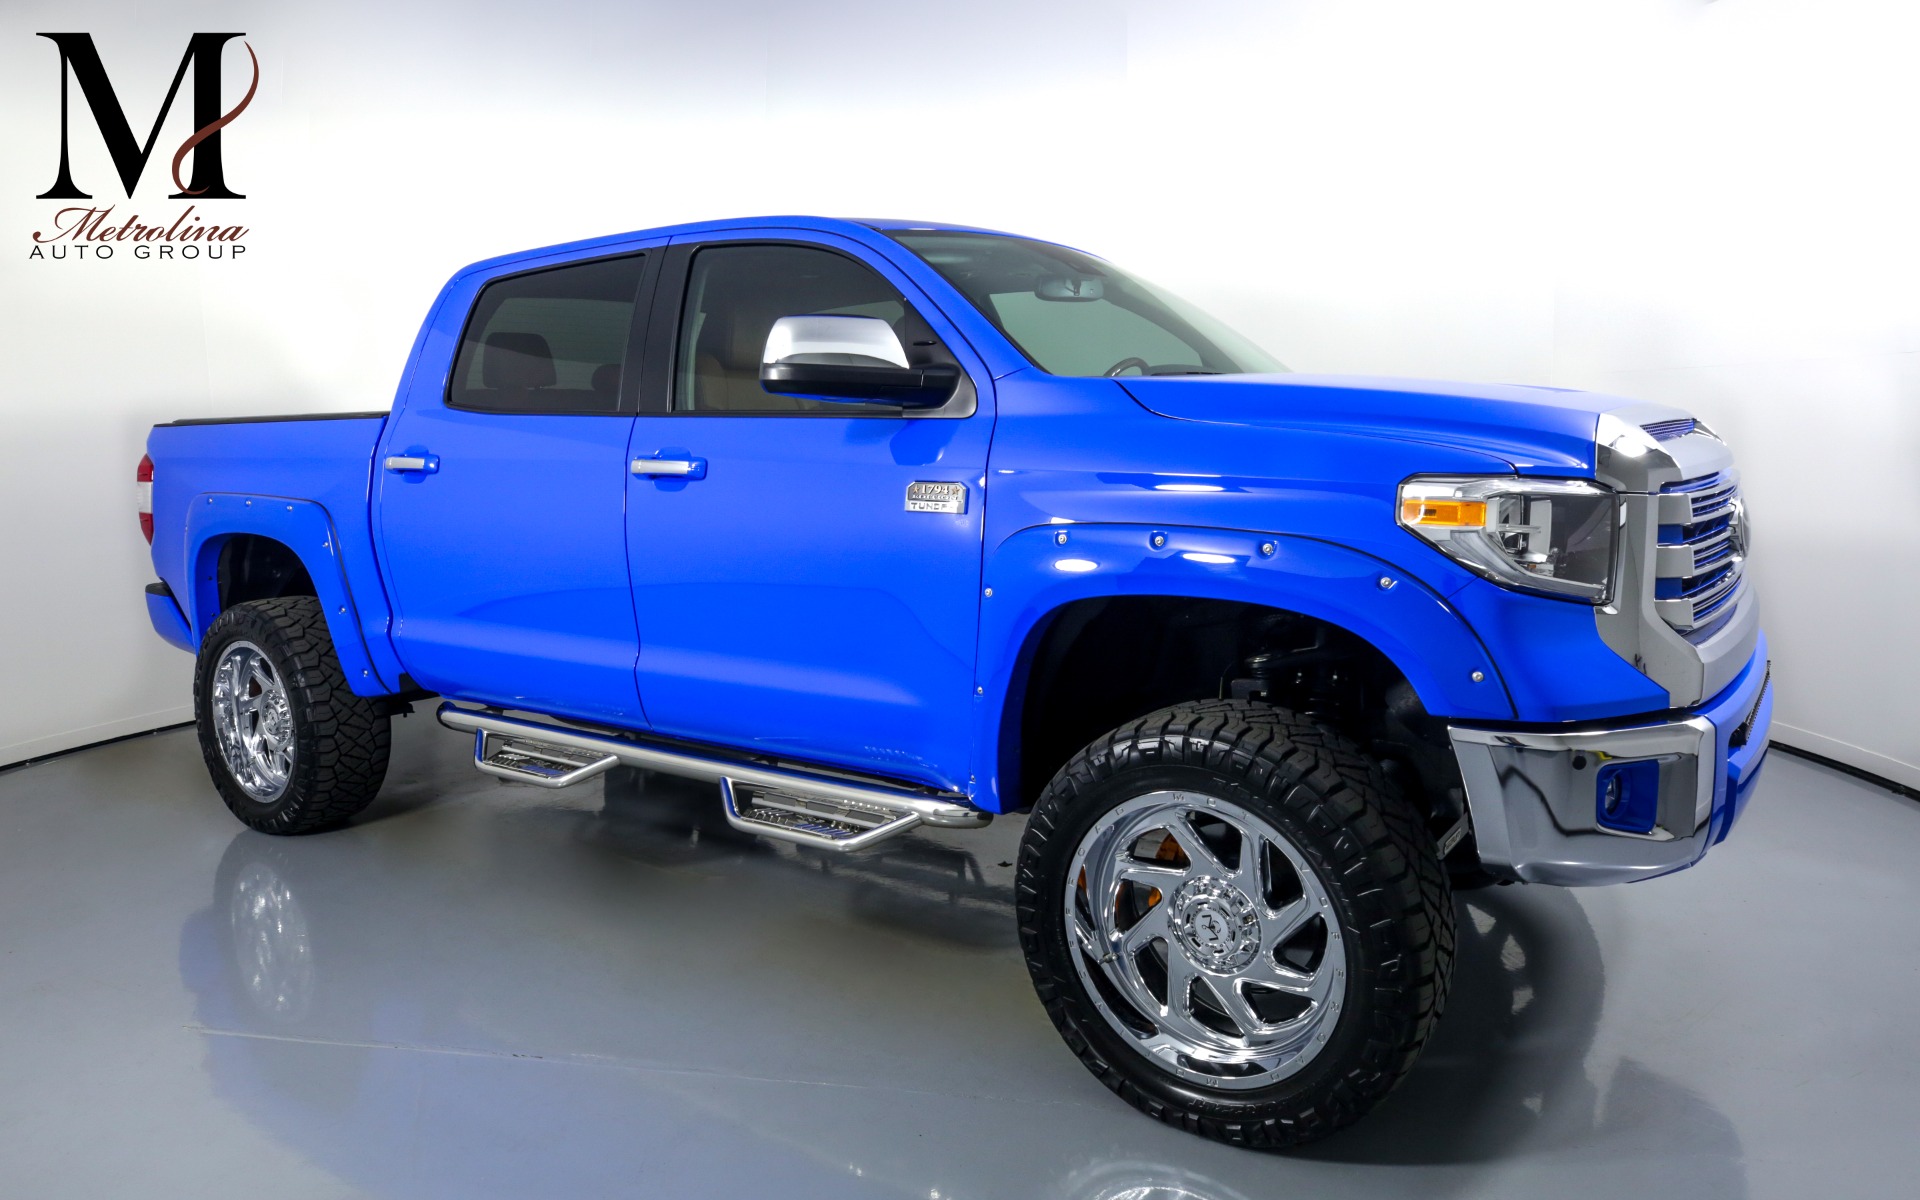 Used 2020 Toyota Tundra 1794 Edition for sale $65,996 at Metrolina Auto Group in Charlotte NC 28217 - 1